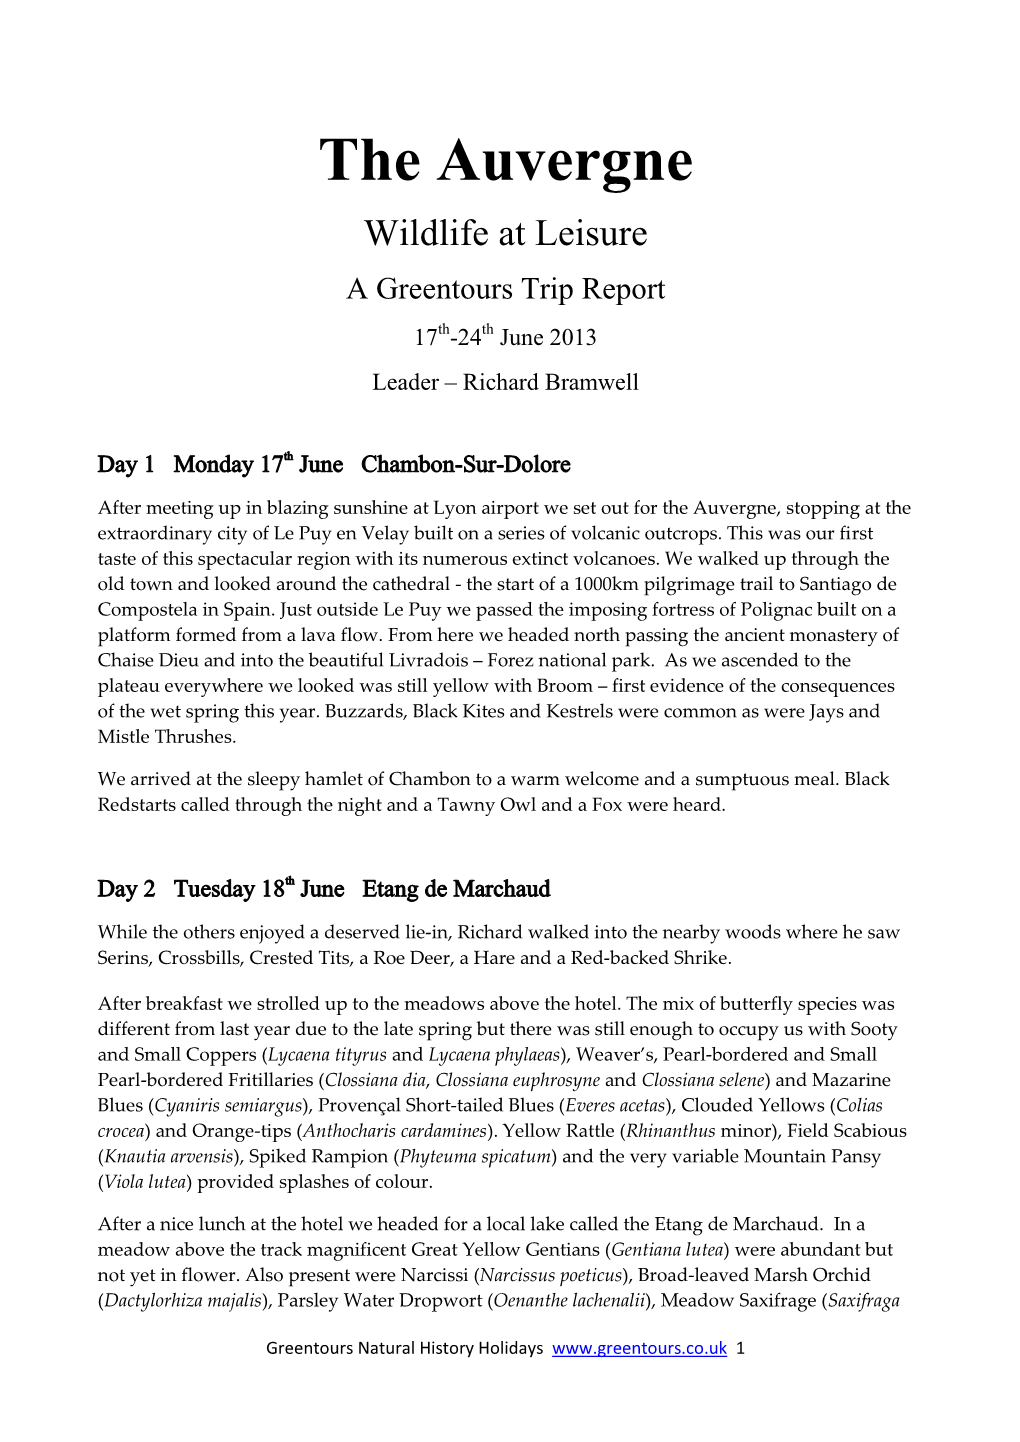 The Auvergne Wildlife at Leisure a Greentours Trip Report 17Th-24Th June 2013 Leader – Richard Bramwell